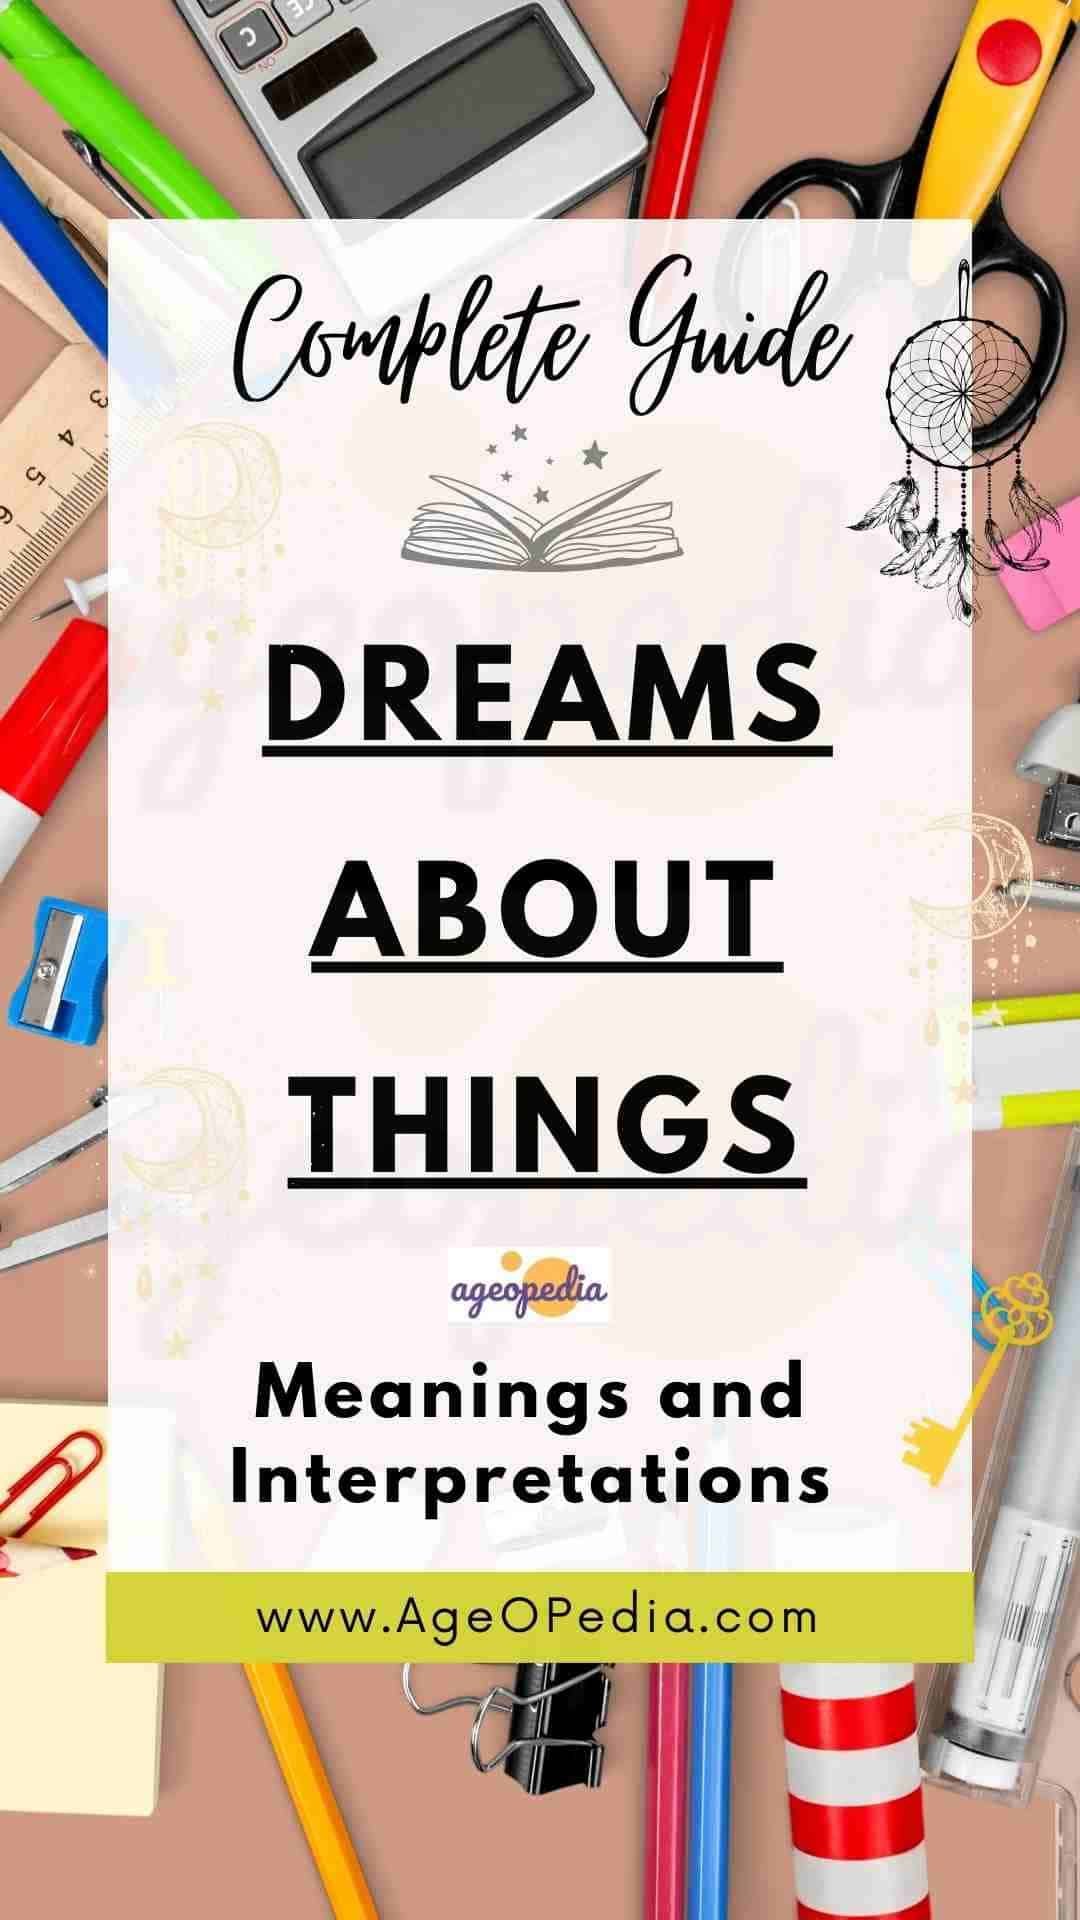 Dream about Things